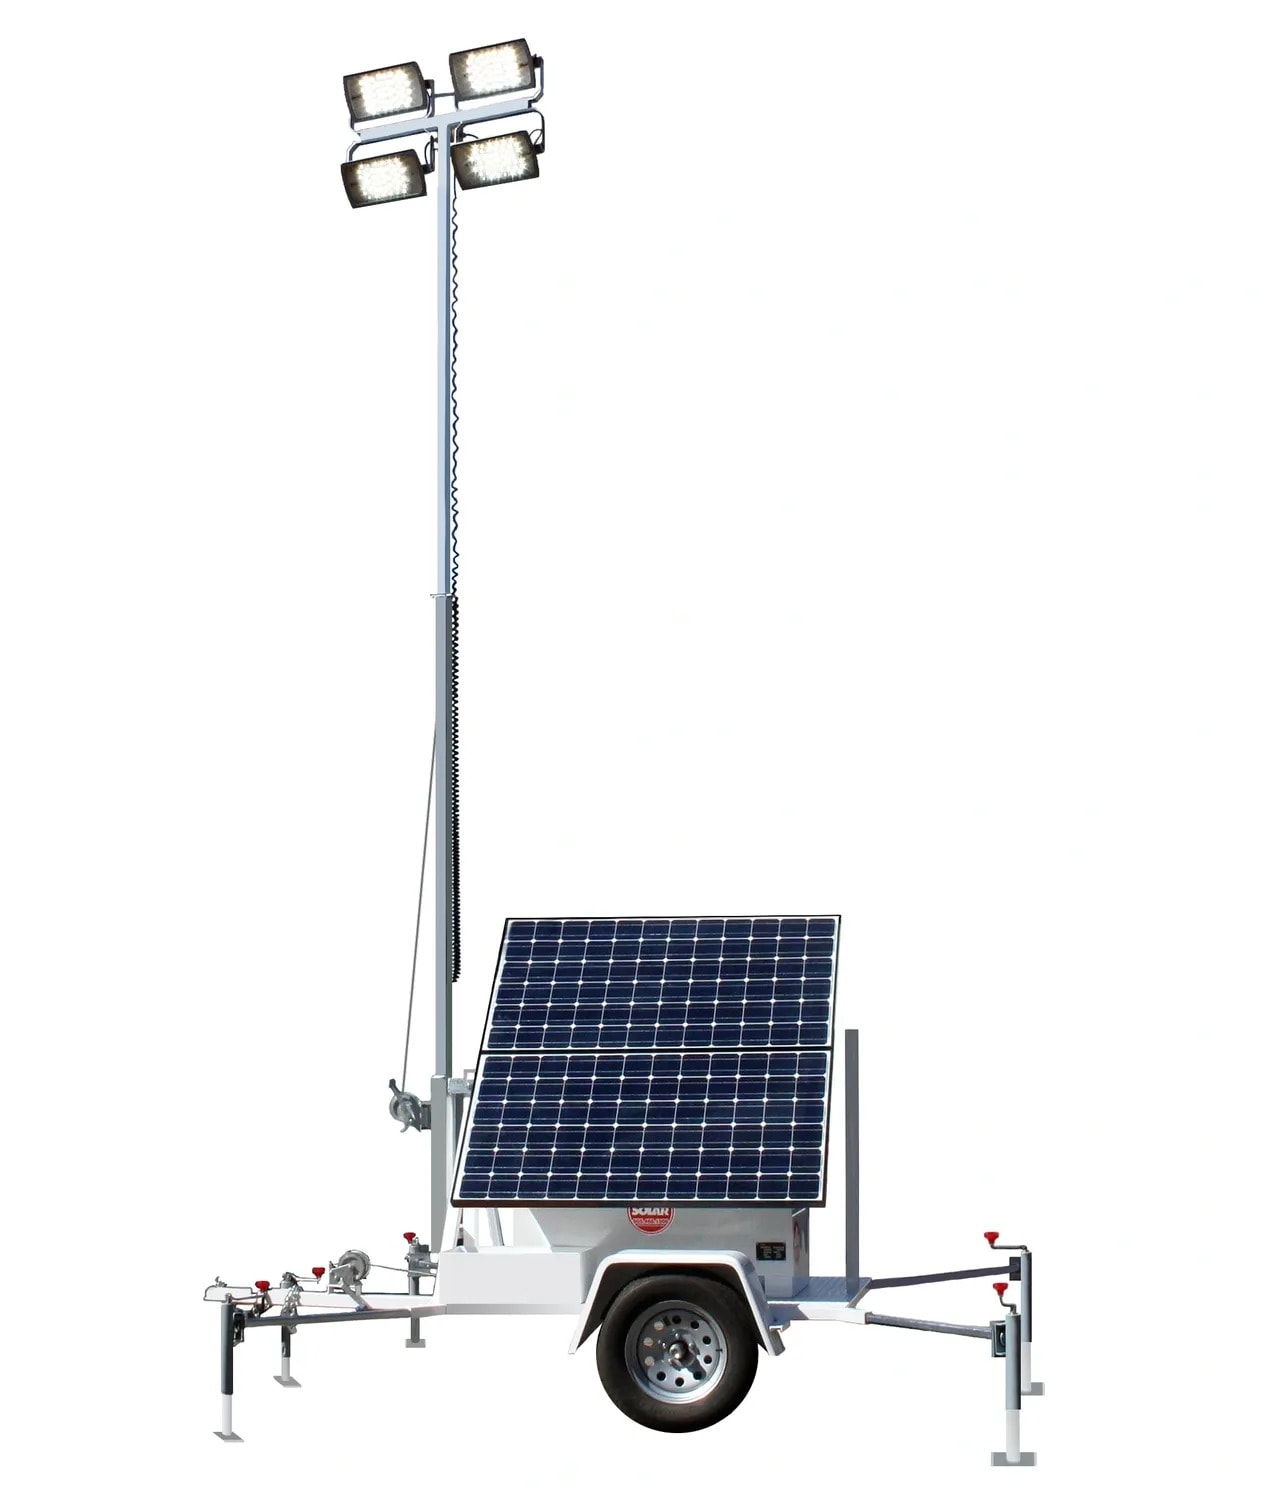 Greensky mobile power & light - Superior, CO, US, solacell